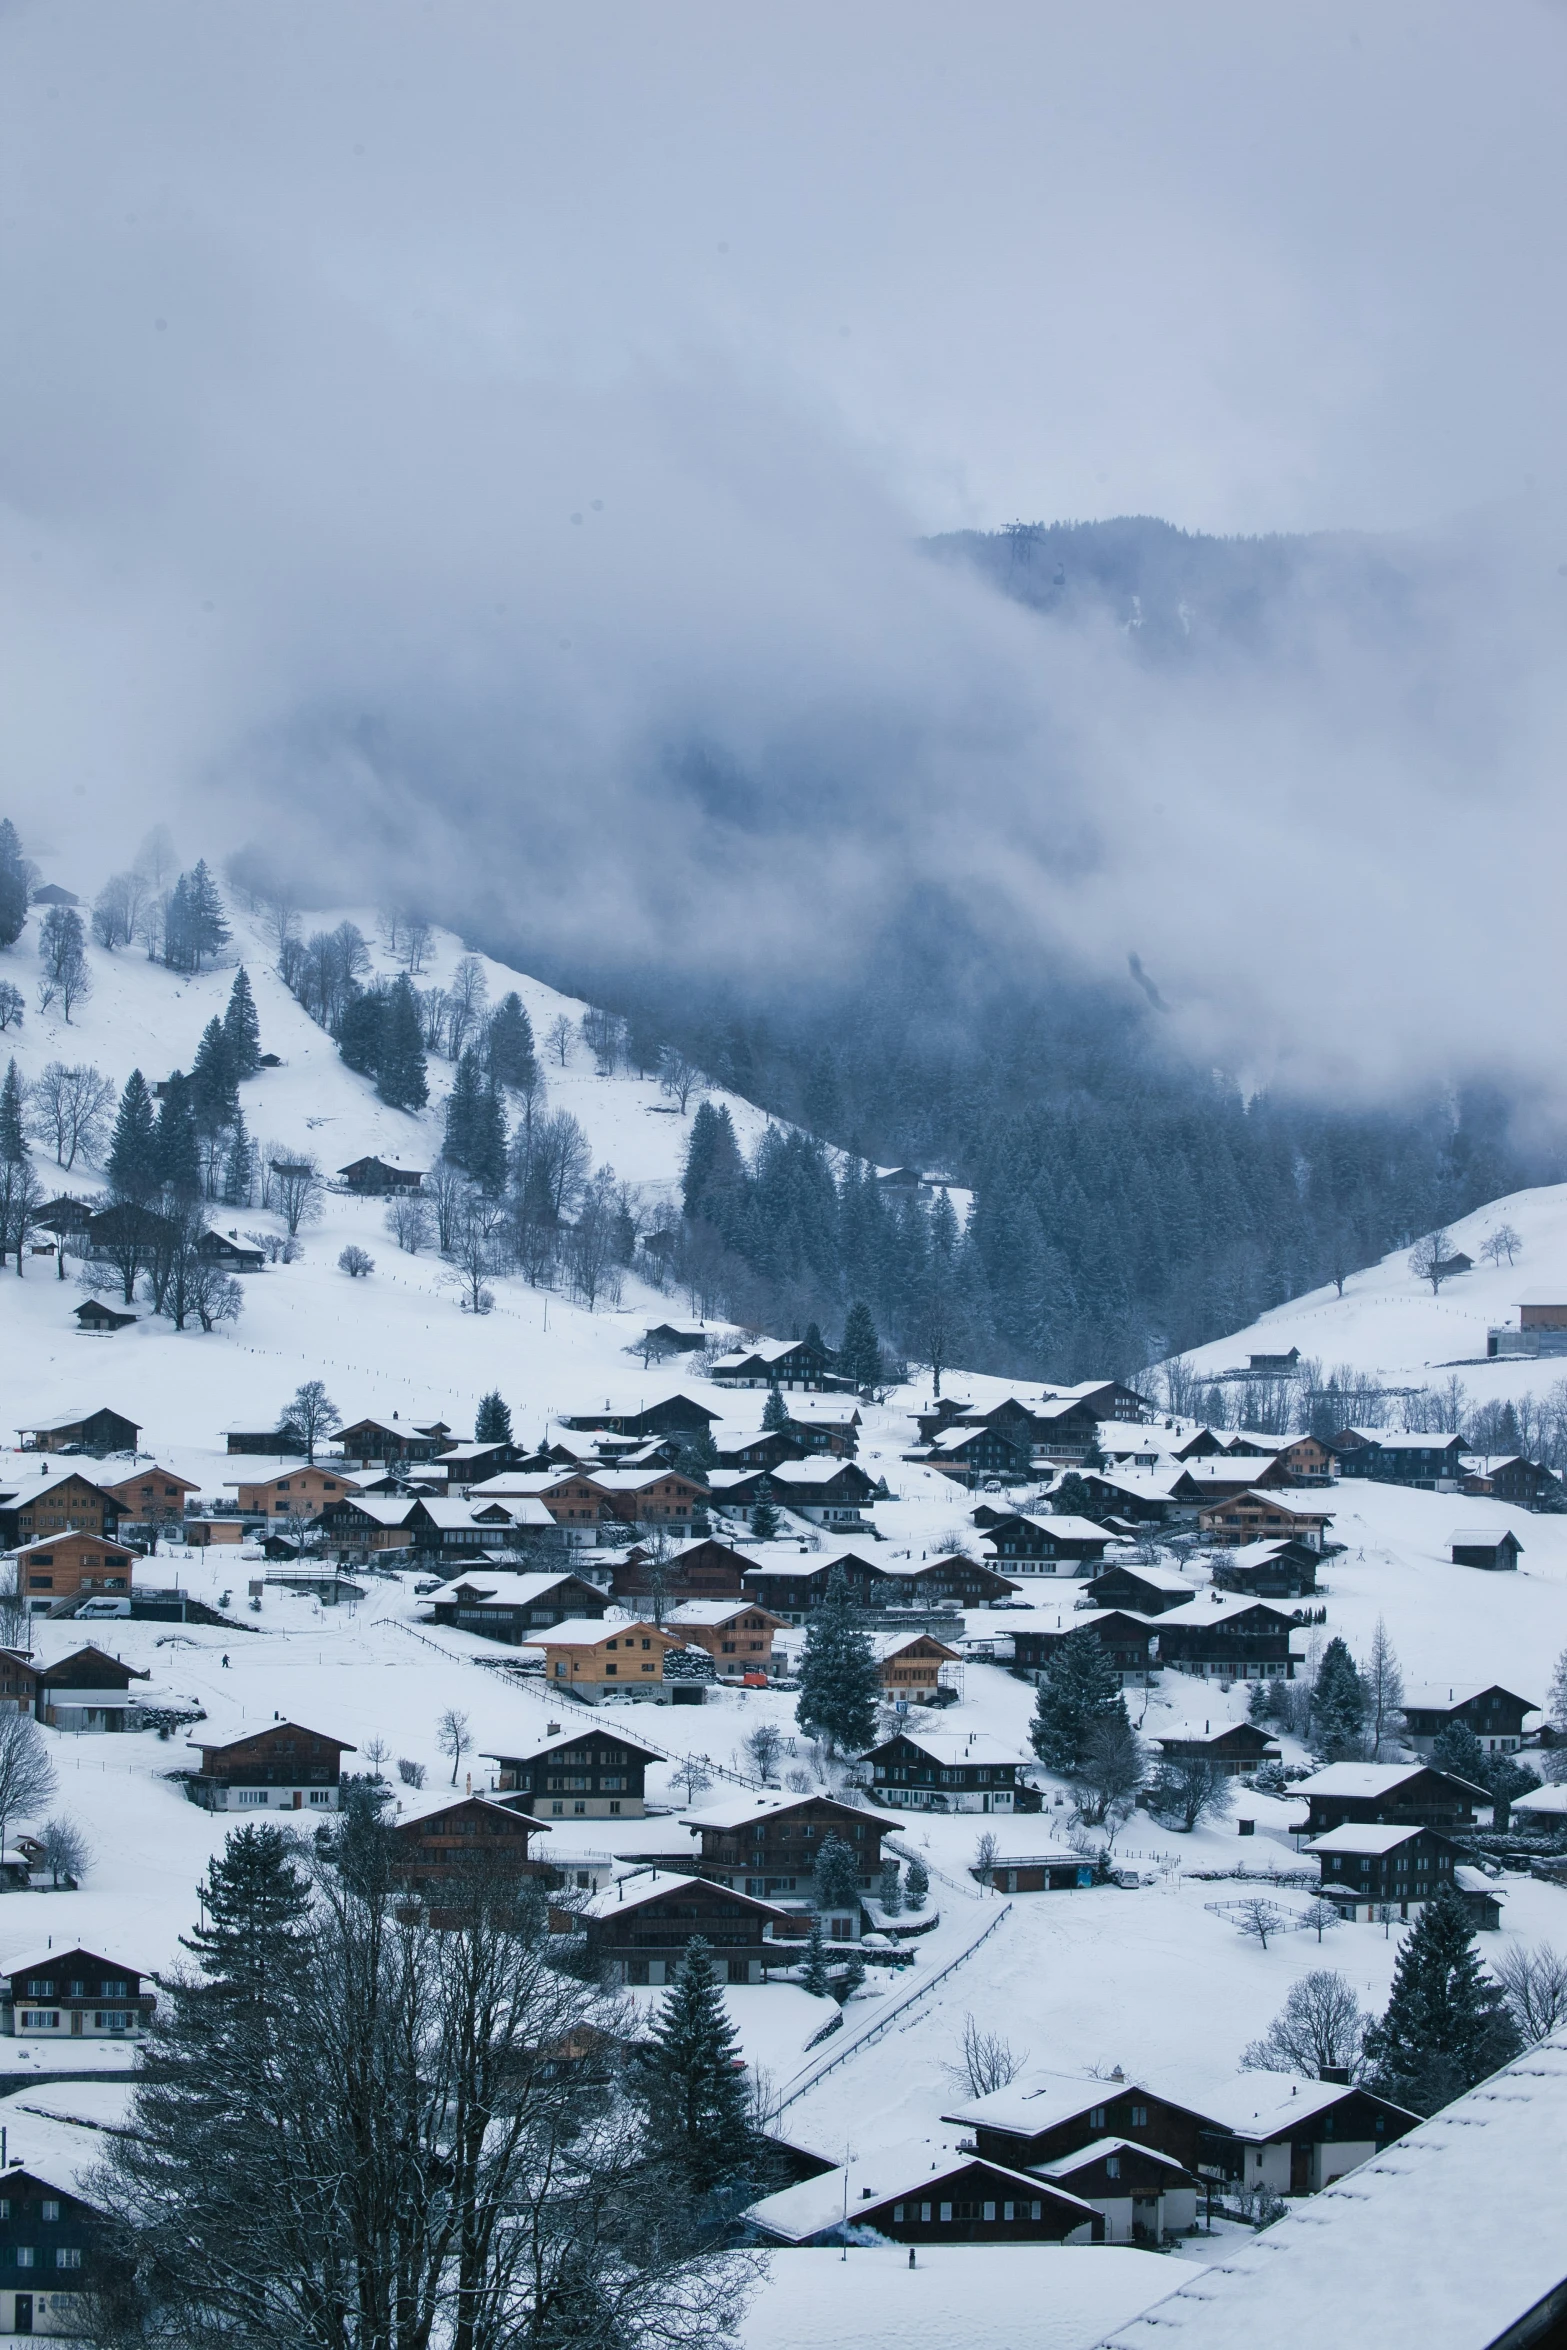 snowy town with small houses nestled among the mountains